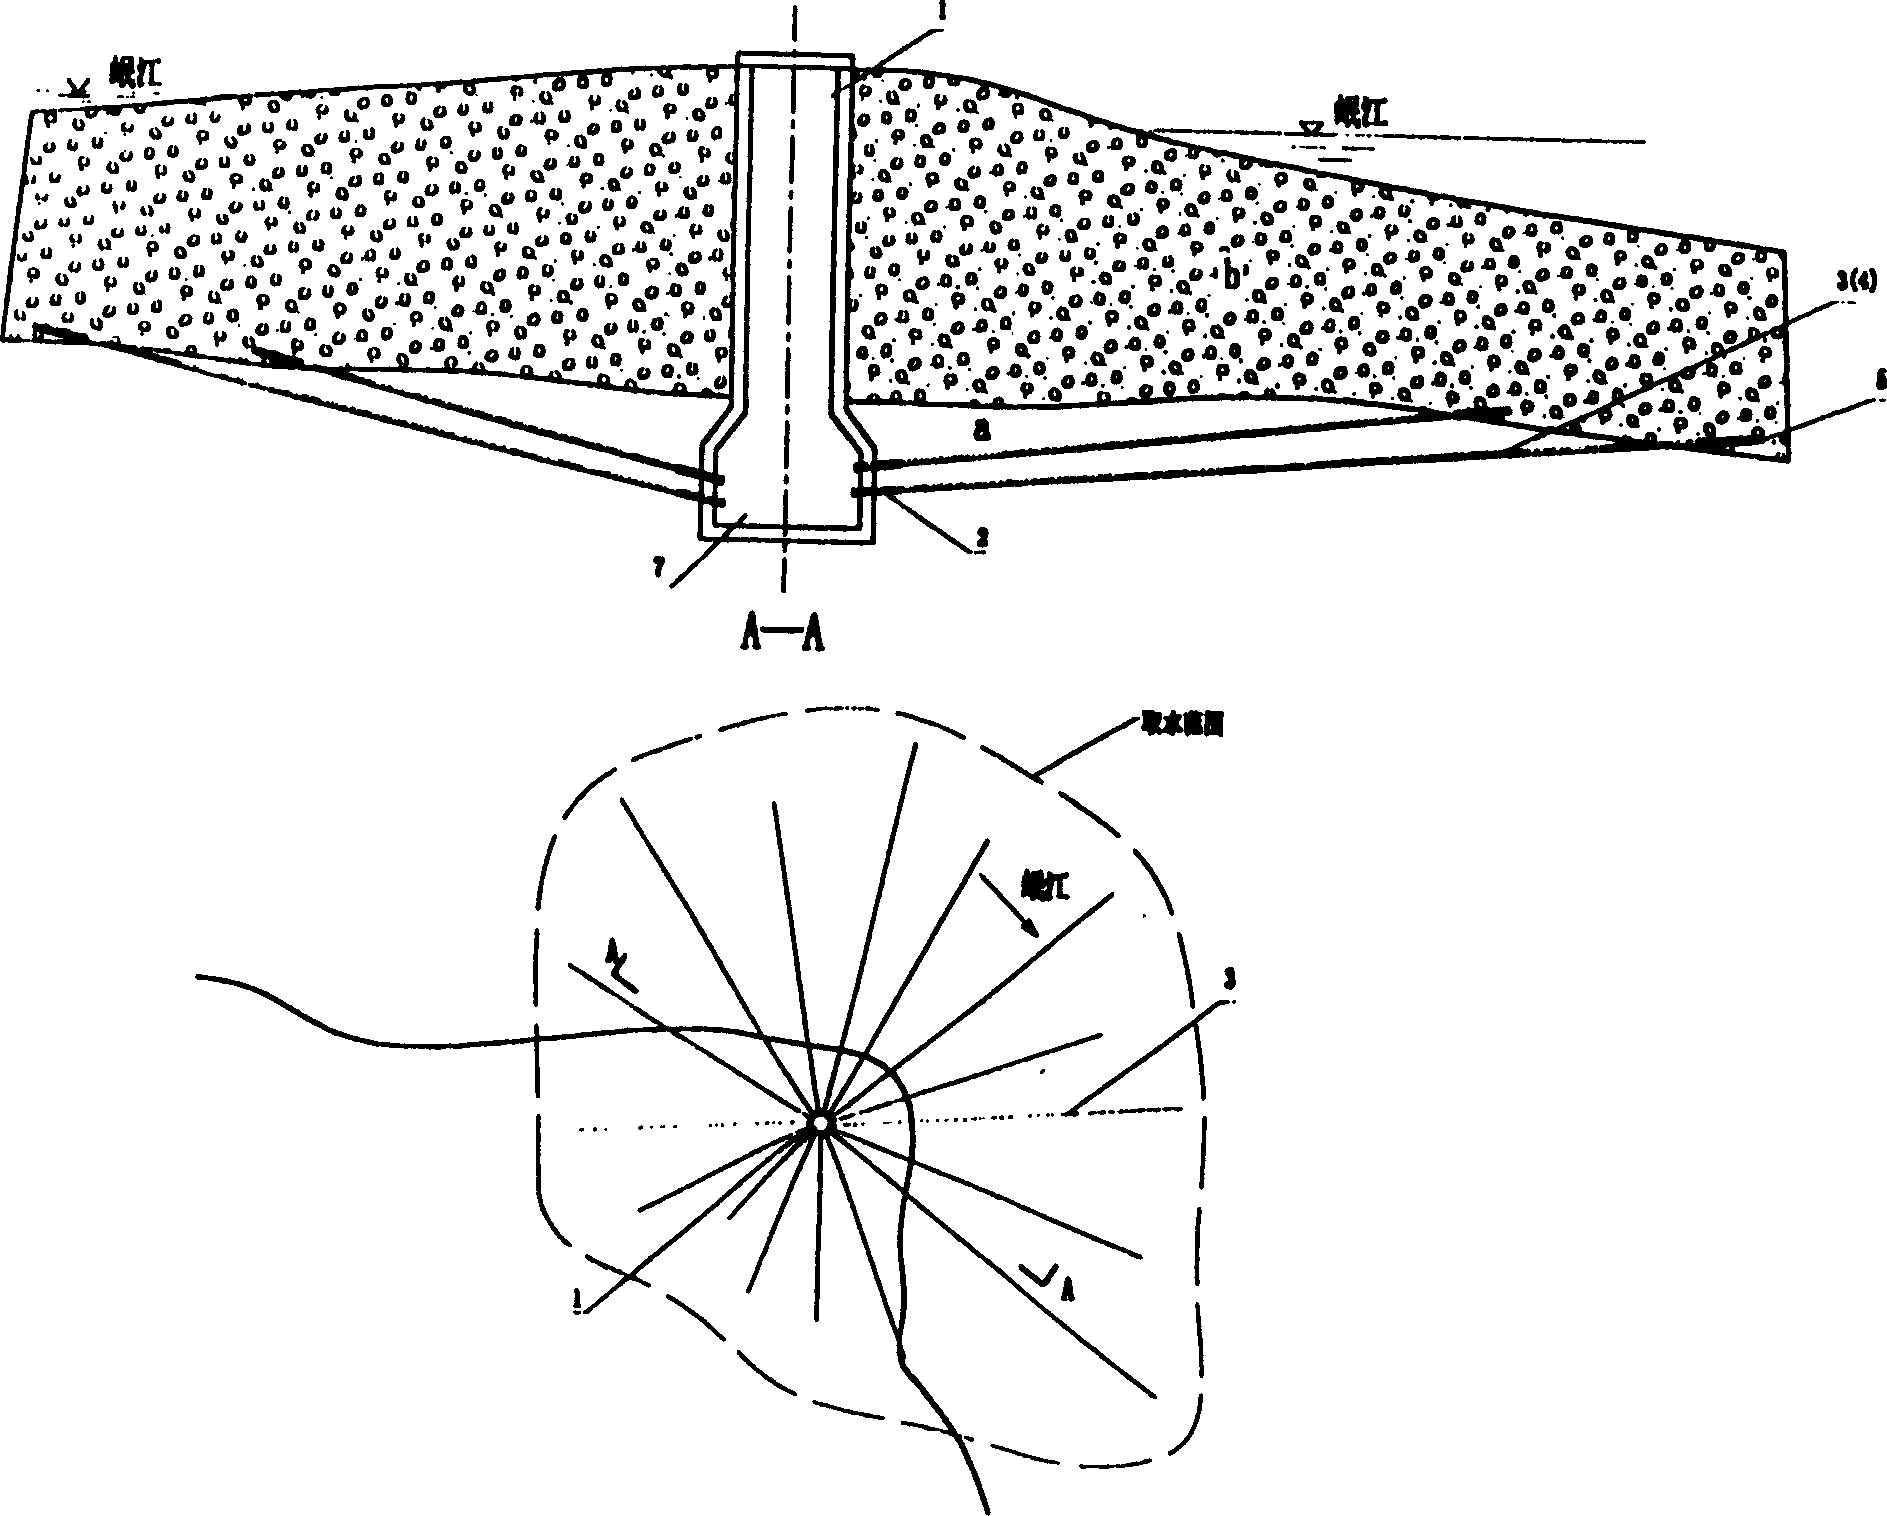 Percolation water intaking method of new engineering structure